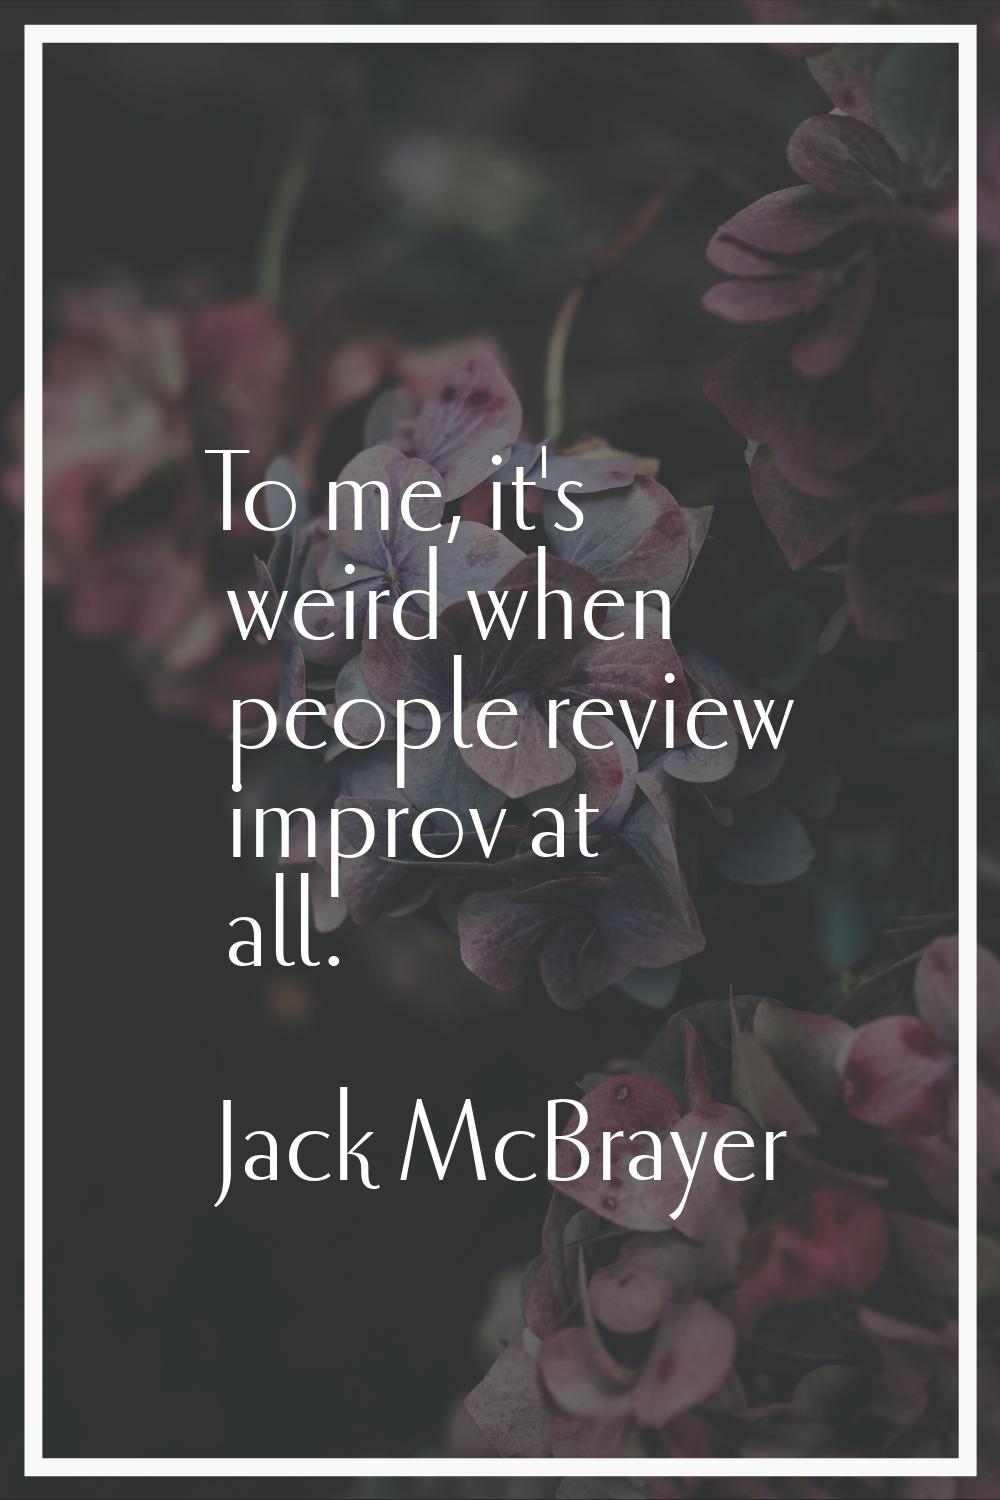 To me, it's weird when people review improv at all.